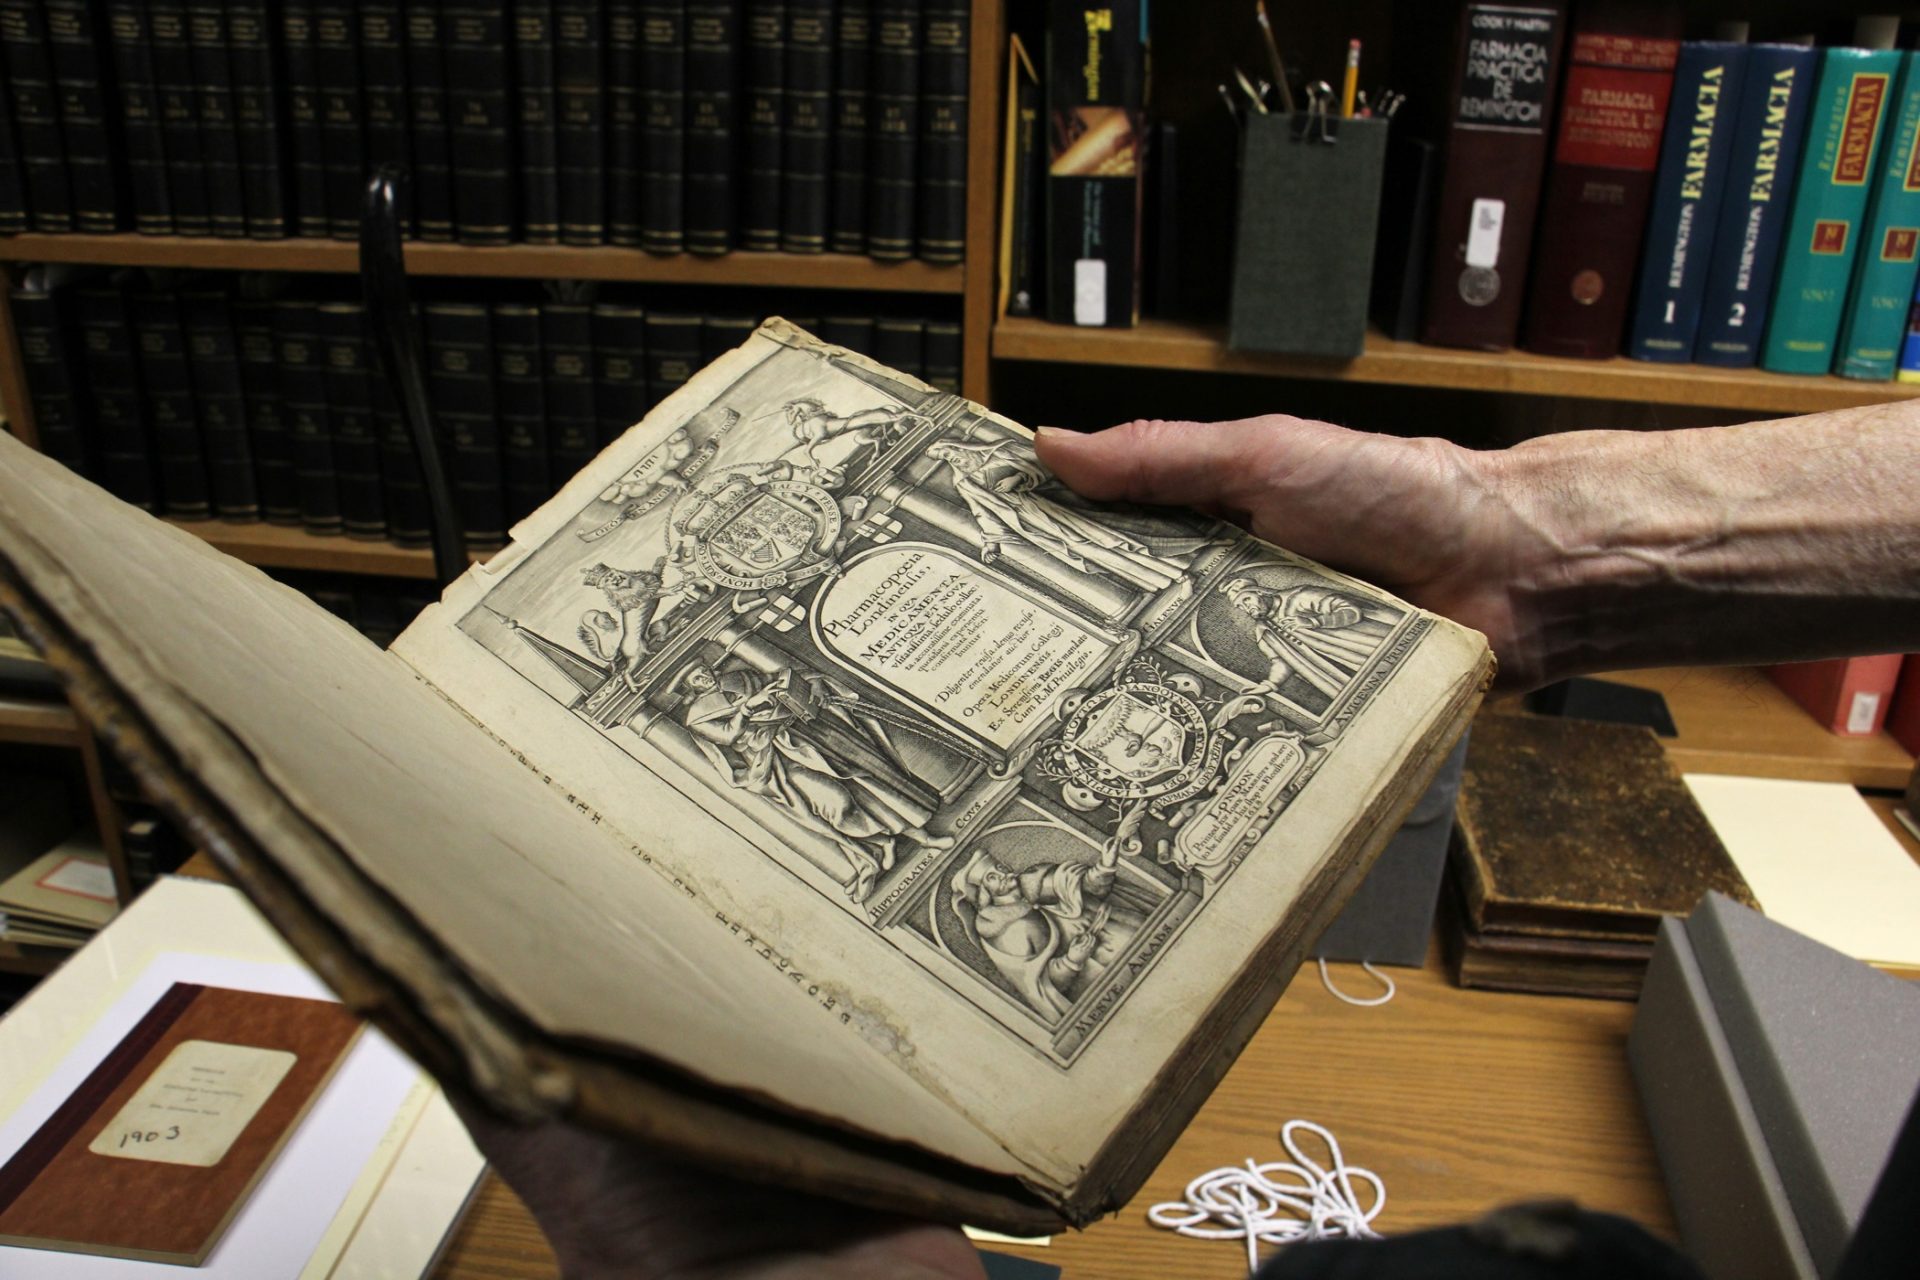 A rare first edition of the Pharmacopoeia Londinensis from 1618 is among the artifacts held by the University of the Sciences.